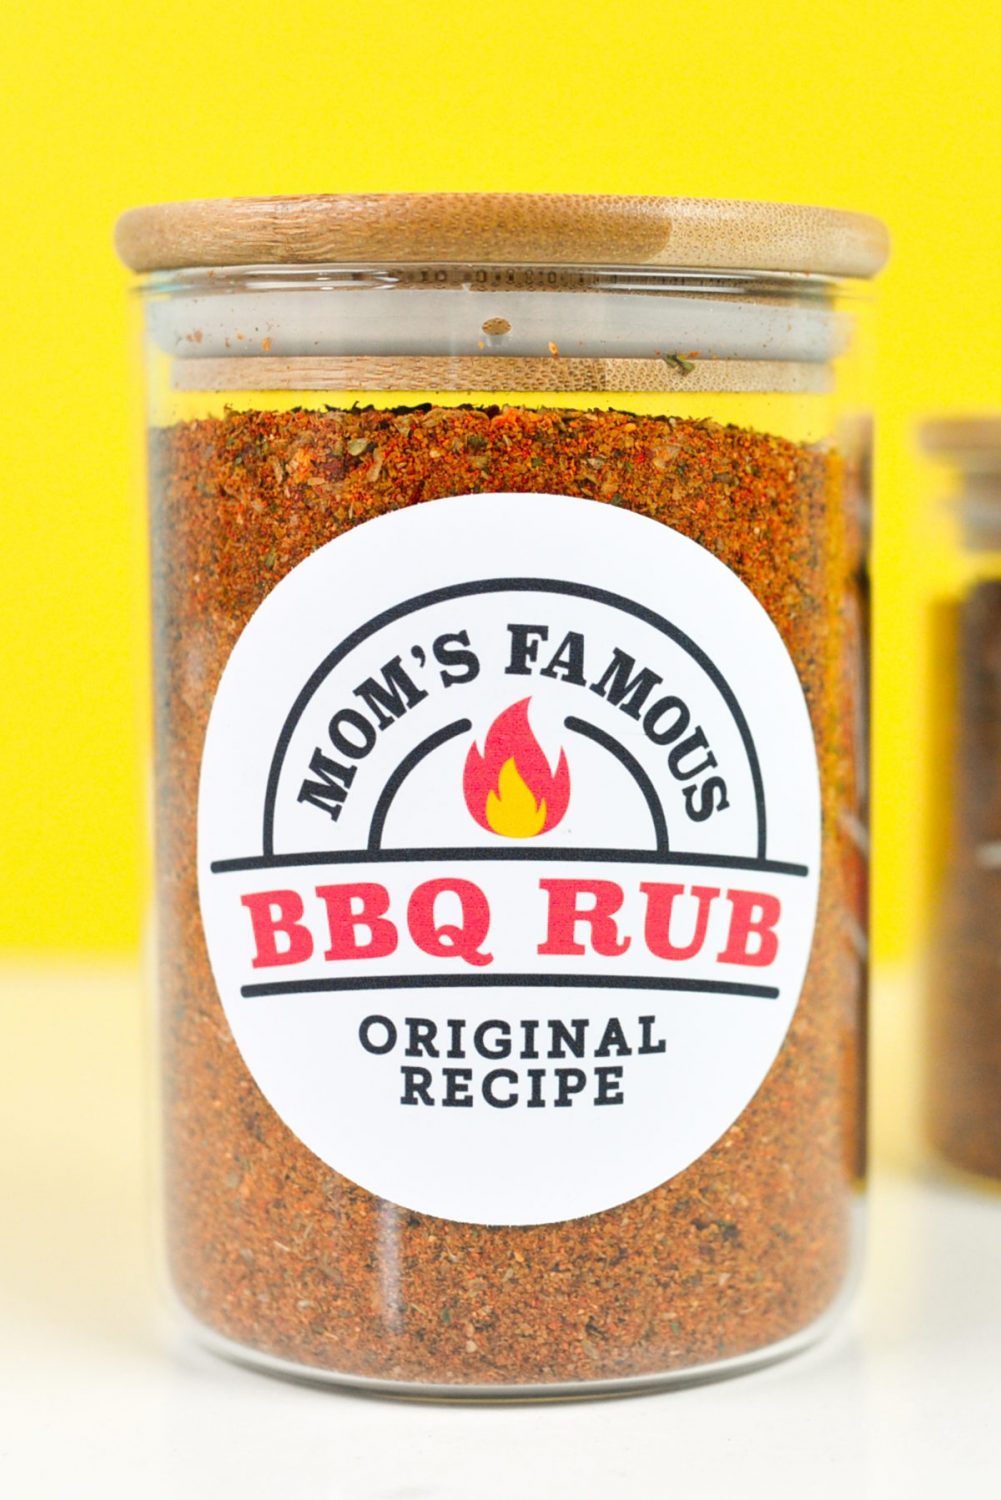 Close up of labeled BBQ rub jar in front of a yellow background